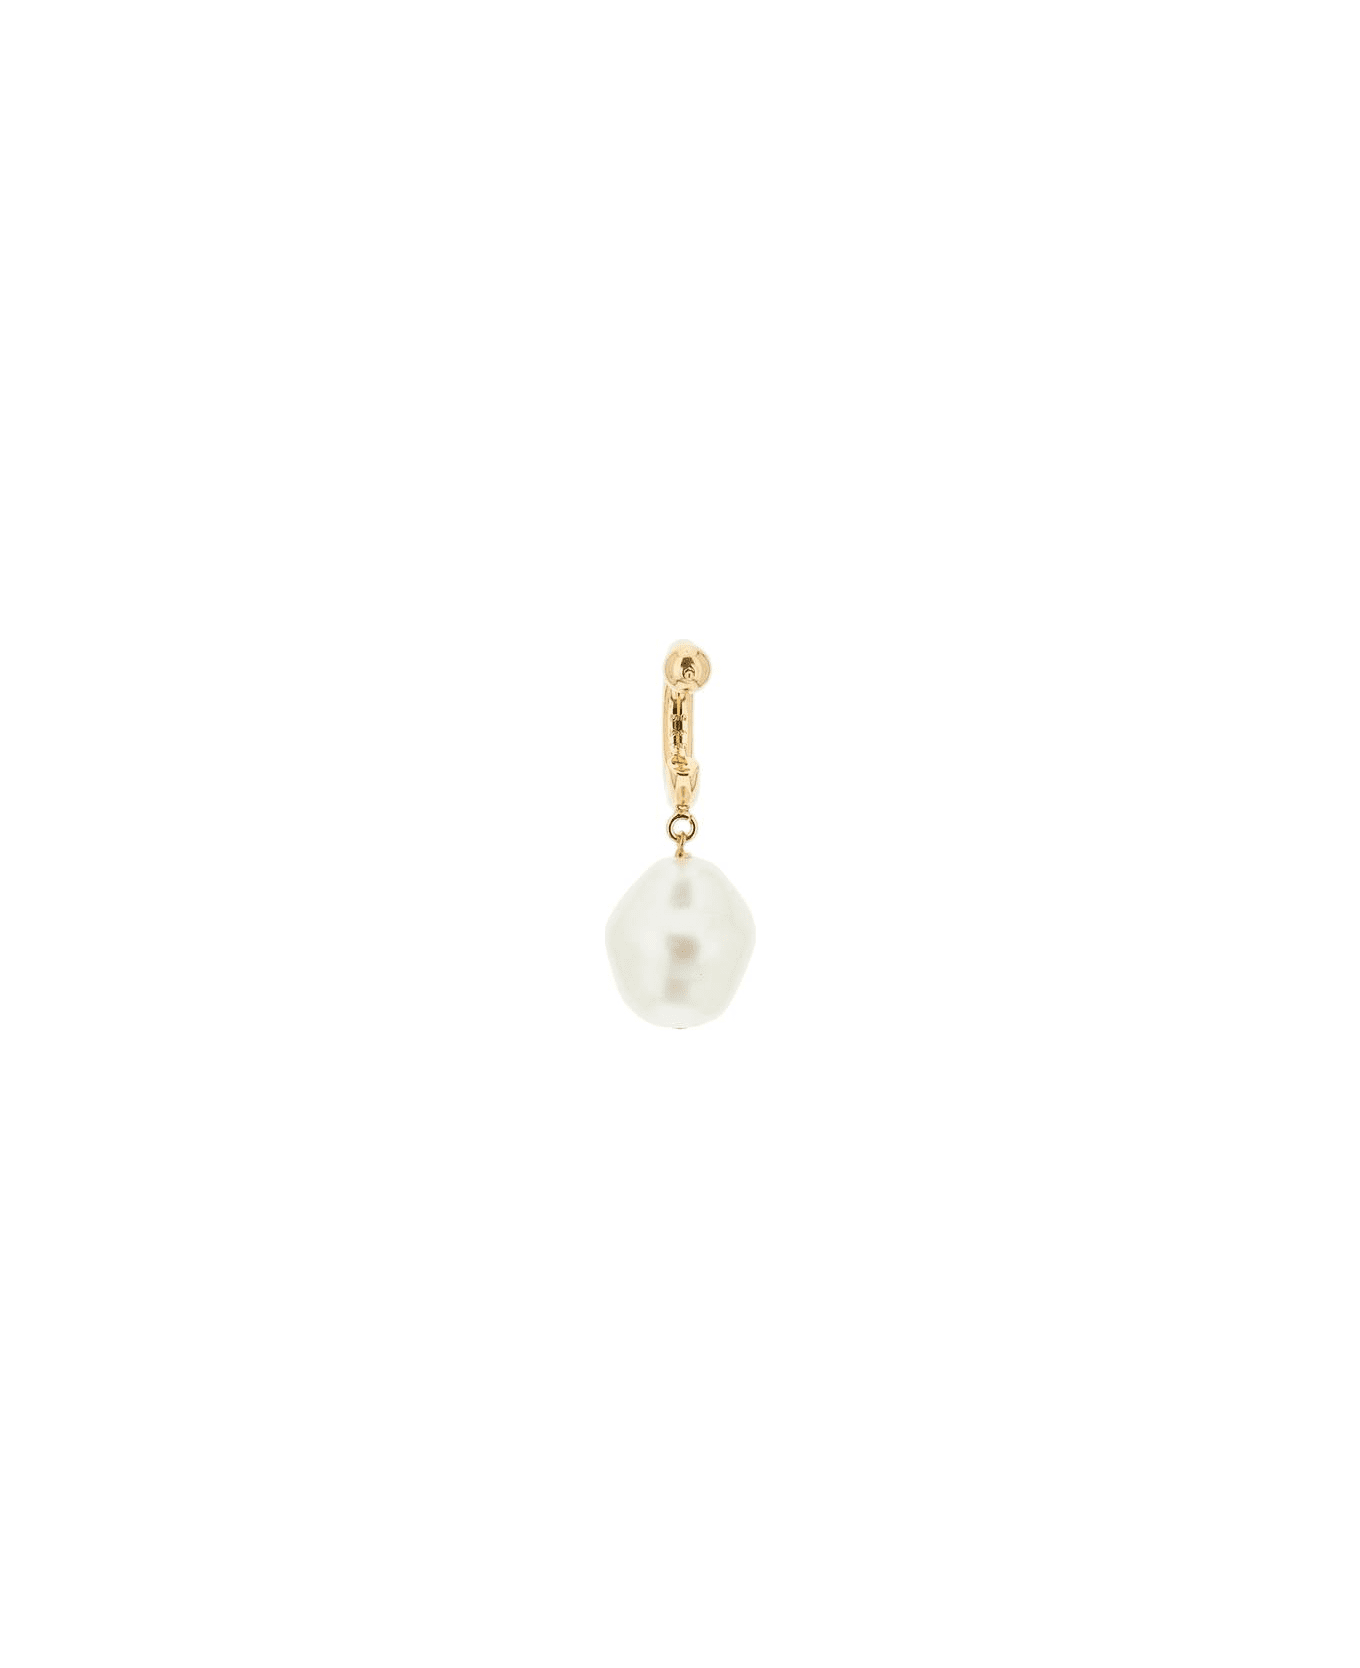 SafSafu 'jelly Cotton Candy' Single Earring - GOLD (Gold)